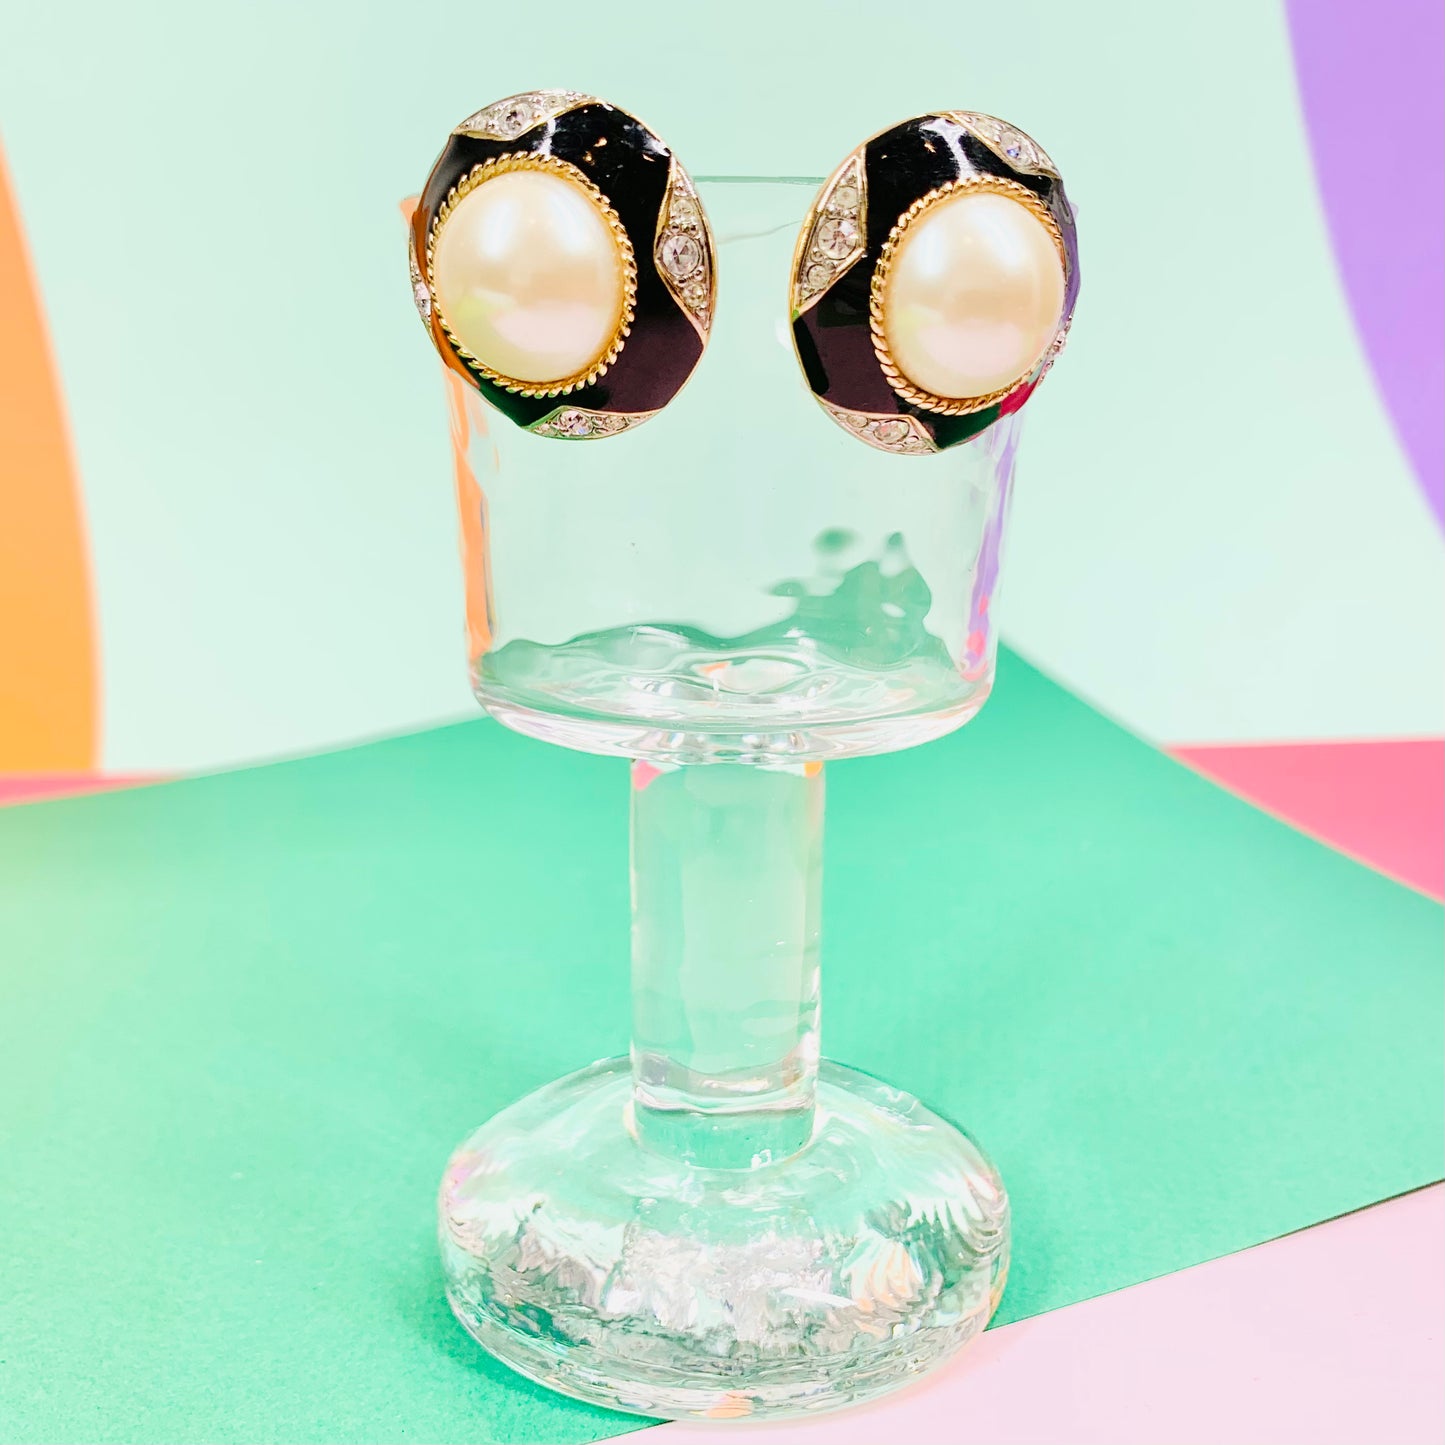 Extremely rare stunning 1960s gold plated clip on black enamel, pearl & clear rhinestones button earrings